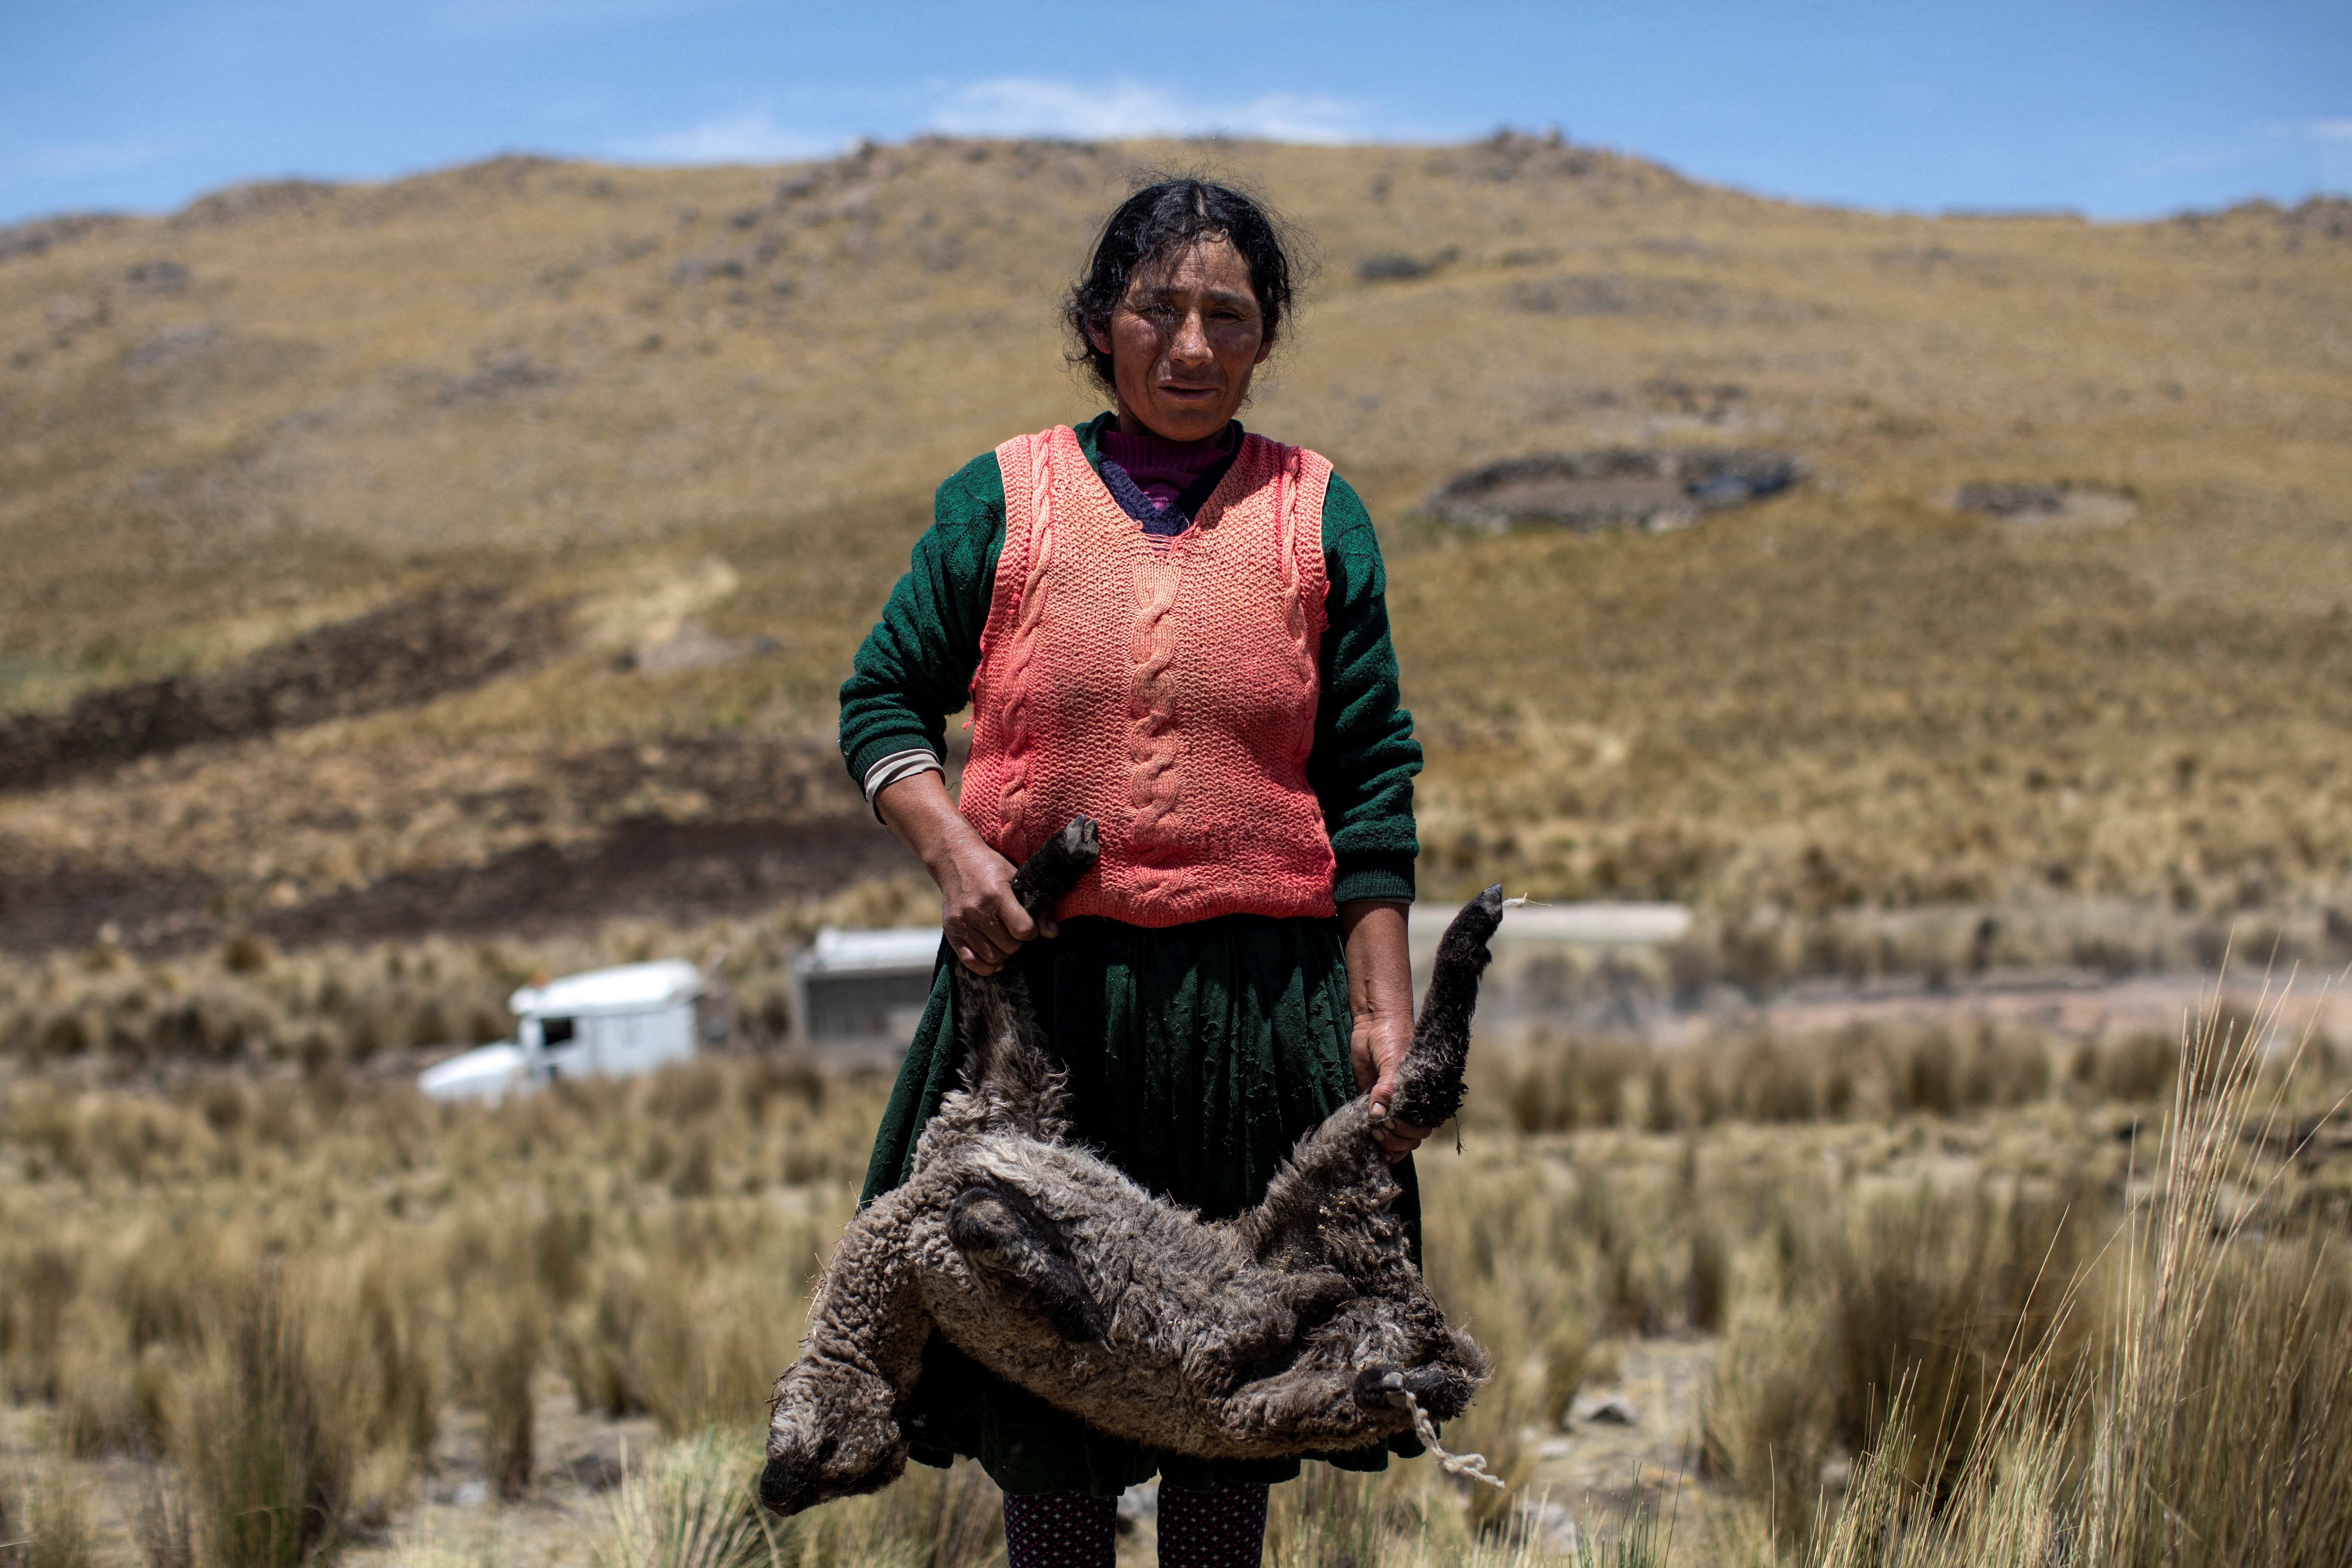 Peru's Andean rural residents complain of negative effects of mining activity